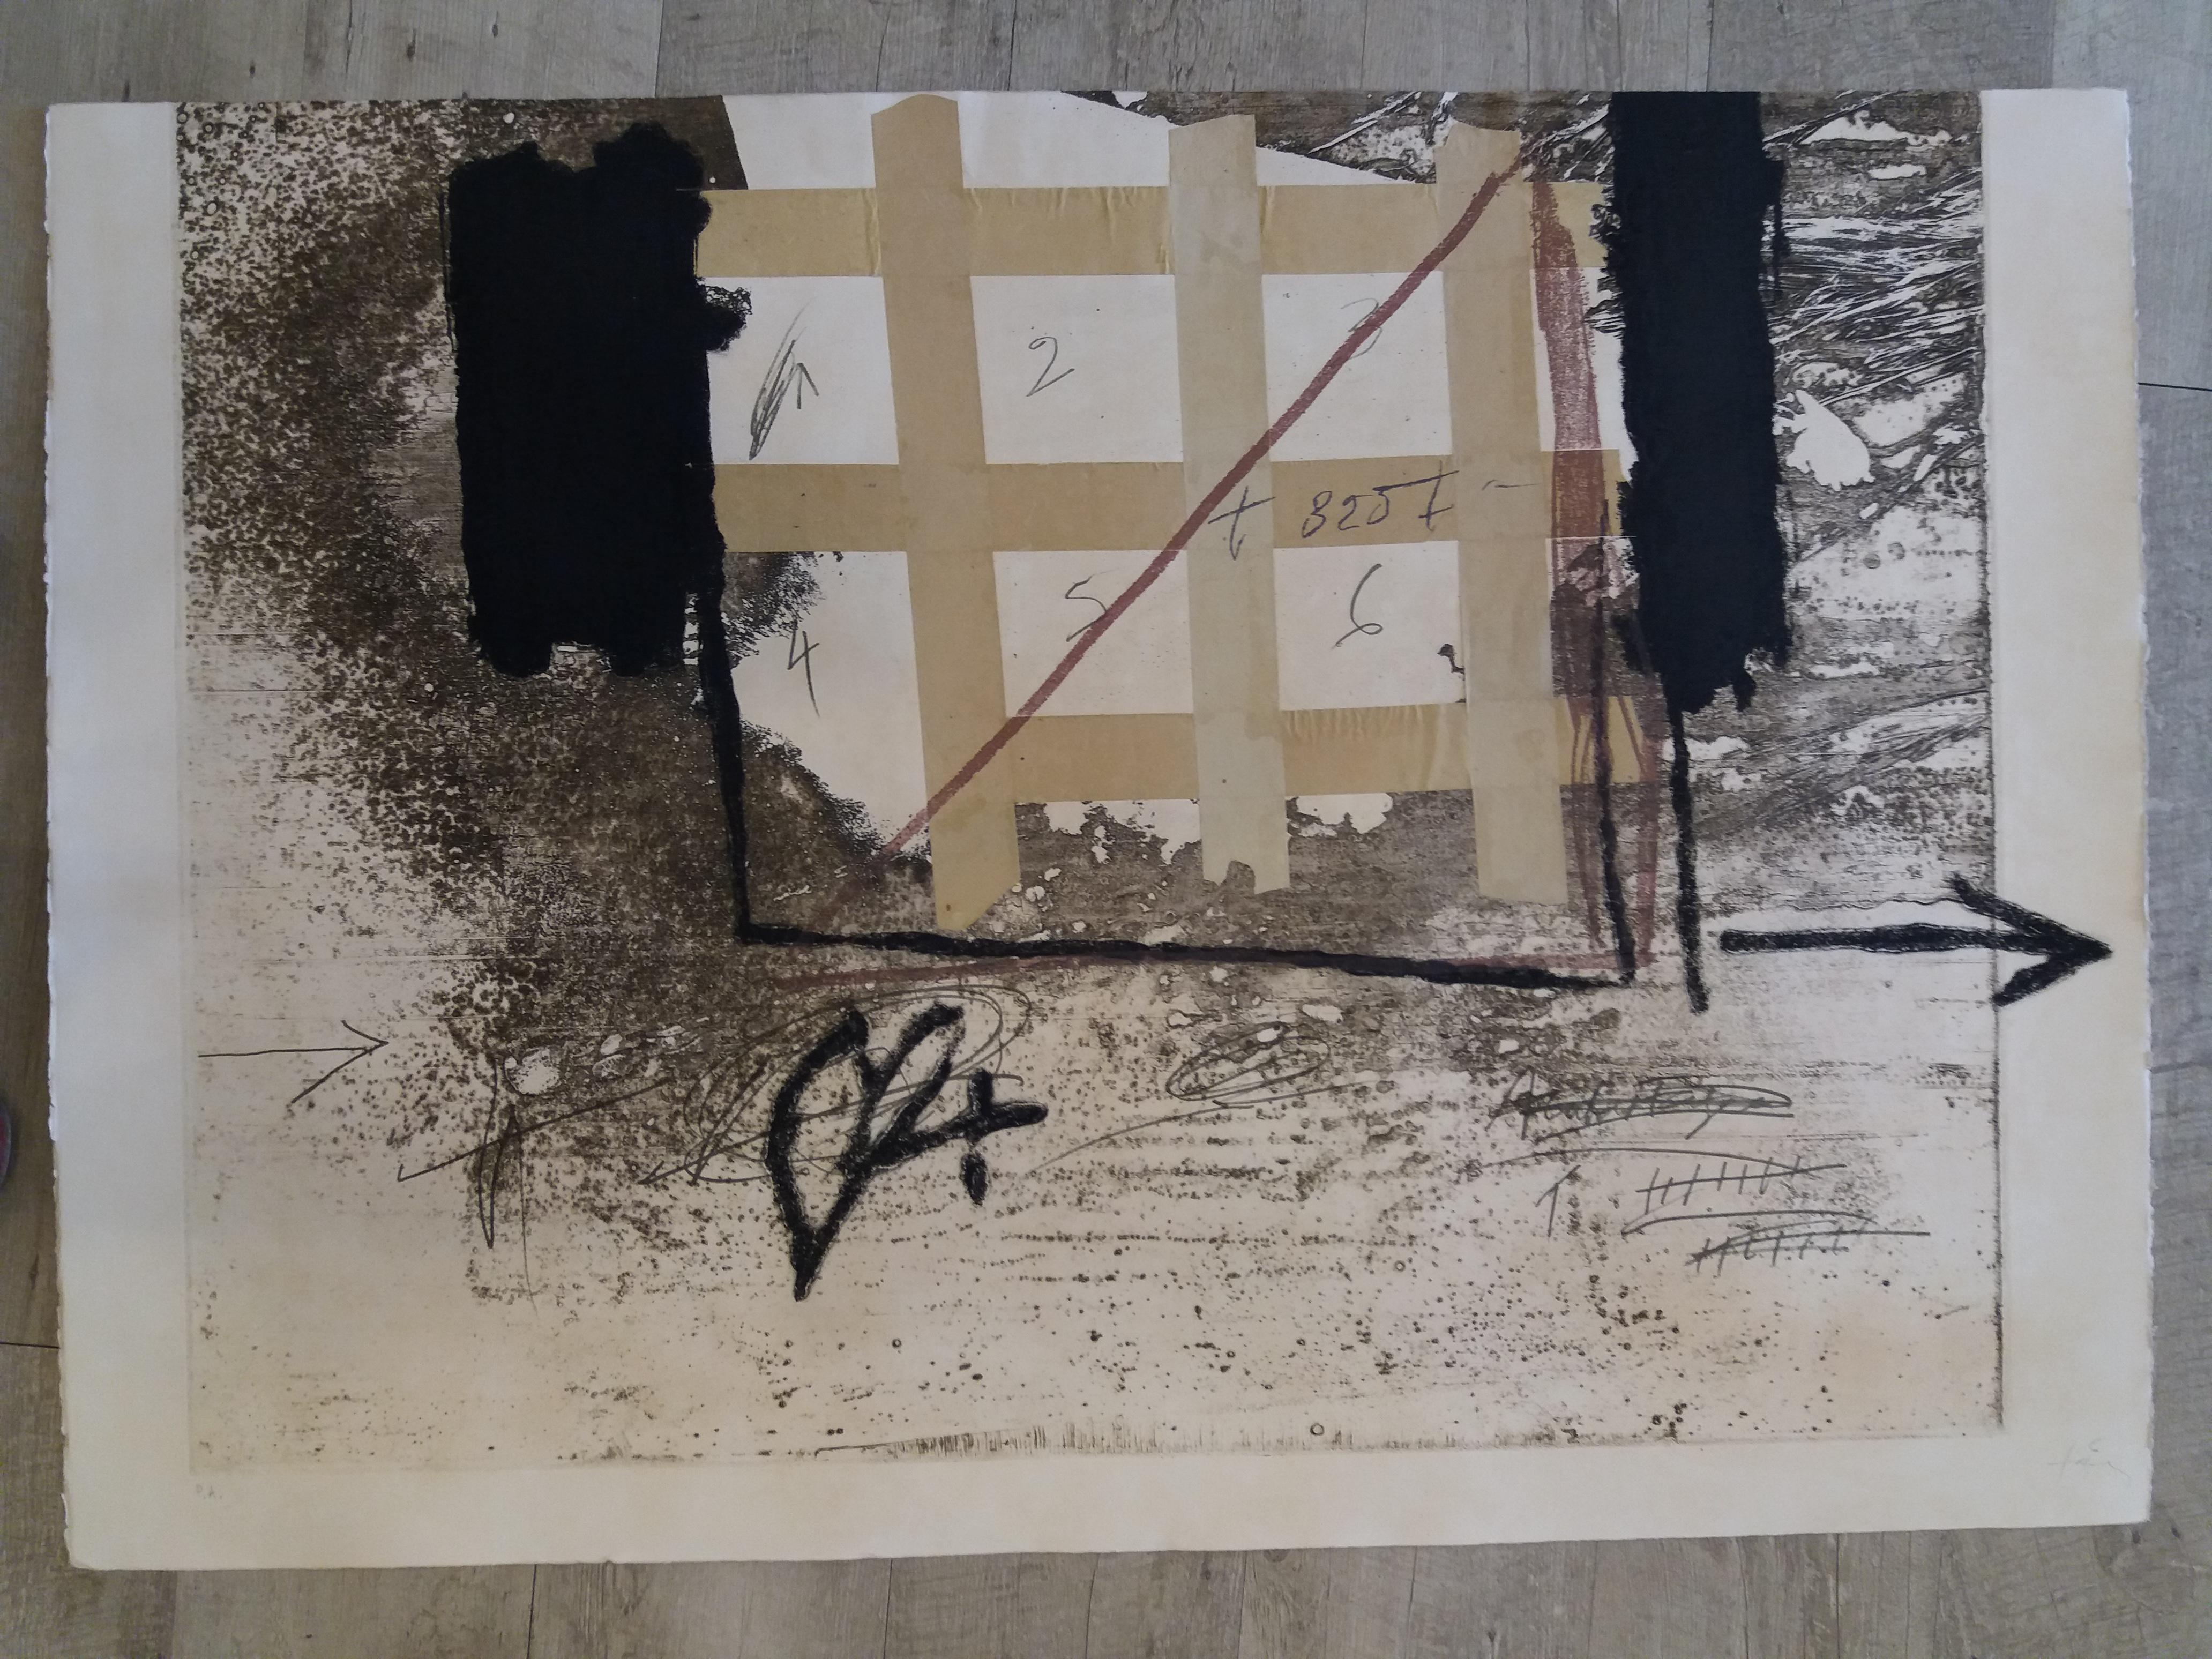  Tapies  Engraved With Plastic Collage and Polychrome stamping abstract  - Abstract Print by Antoni Tàpies